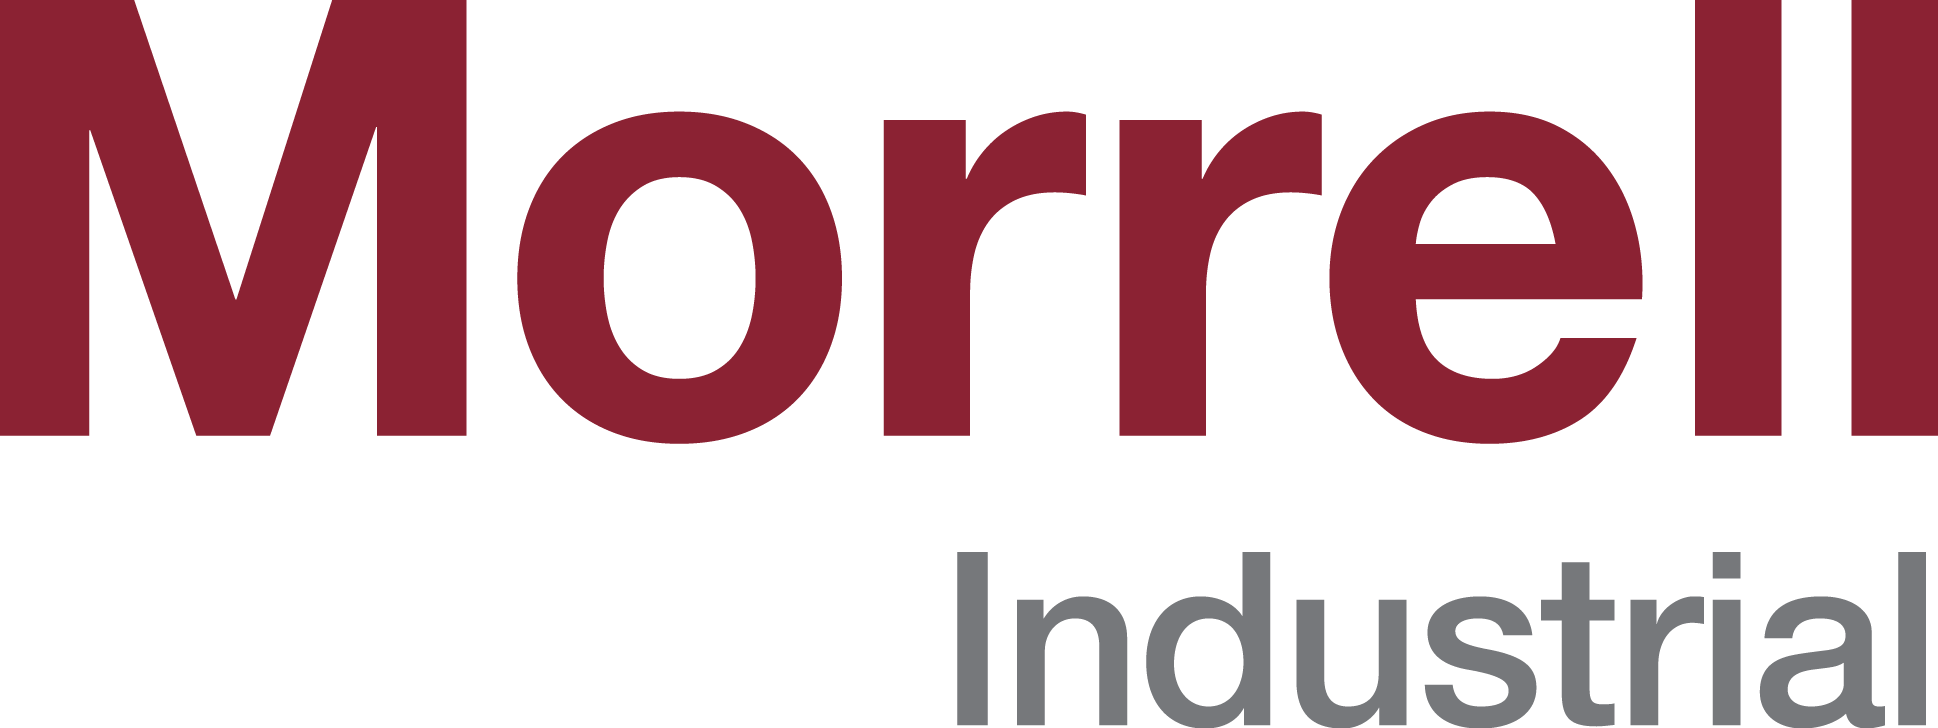 Morrell Industrial - Morrell Group